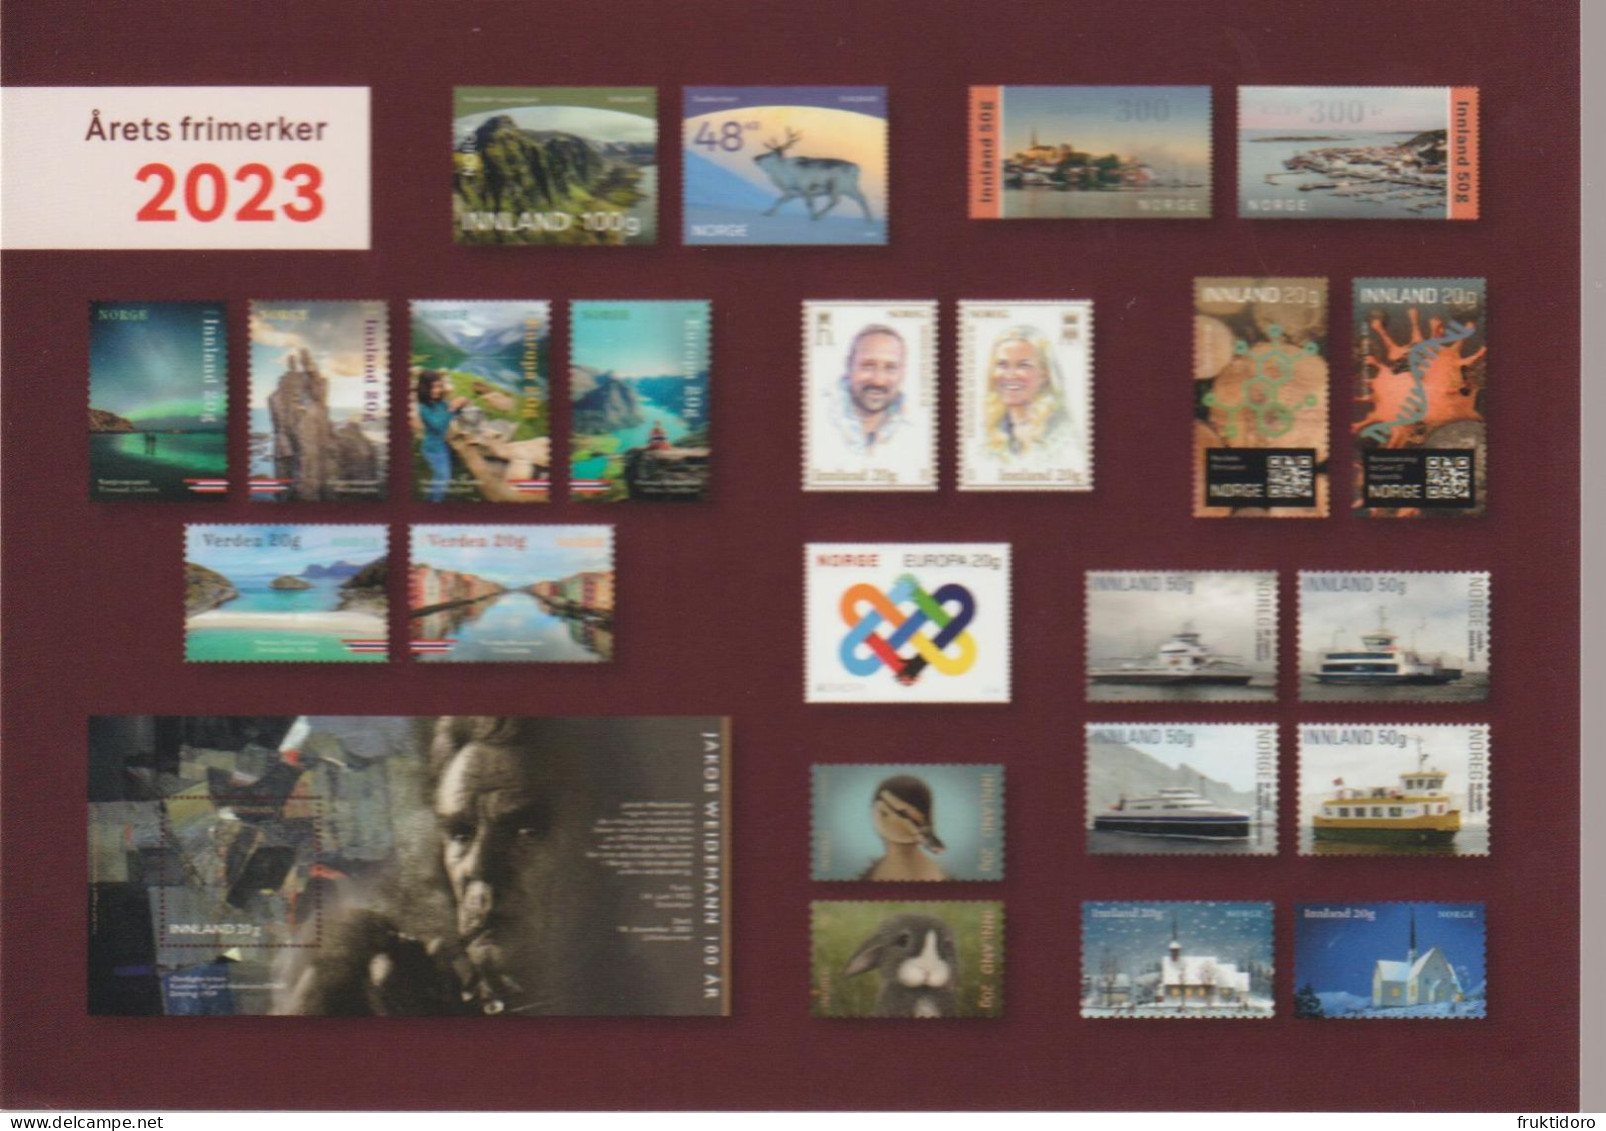 Norway Postcard Depicting All Stamps Issued In 2023 - Variedades Y Curiosidades